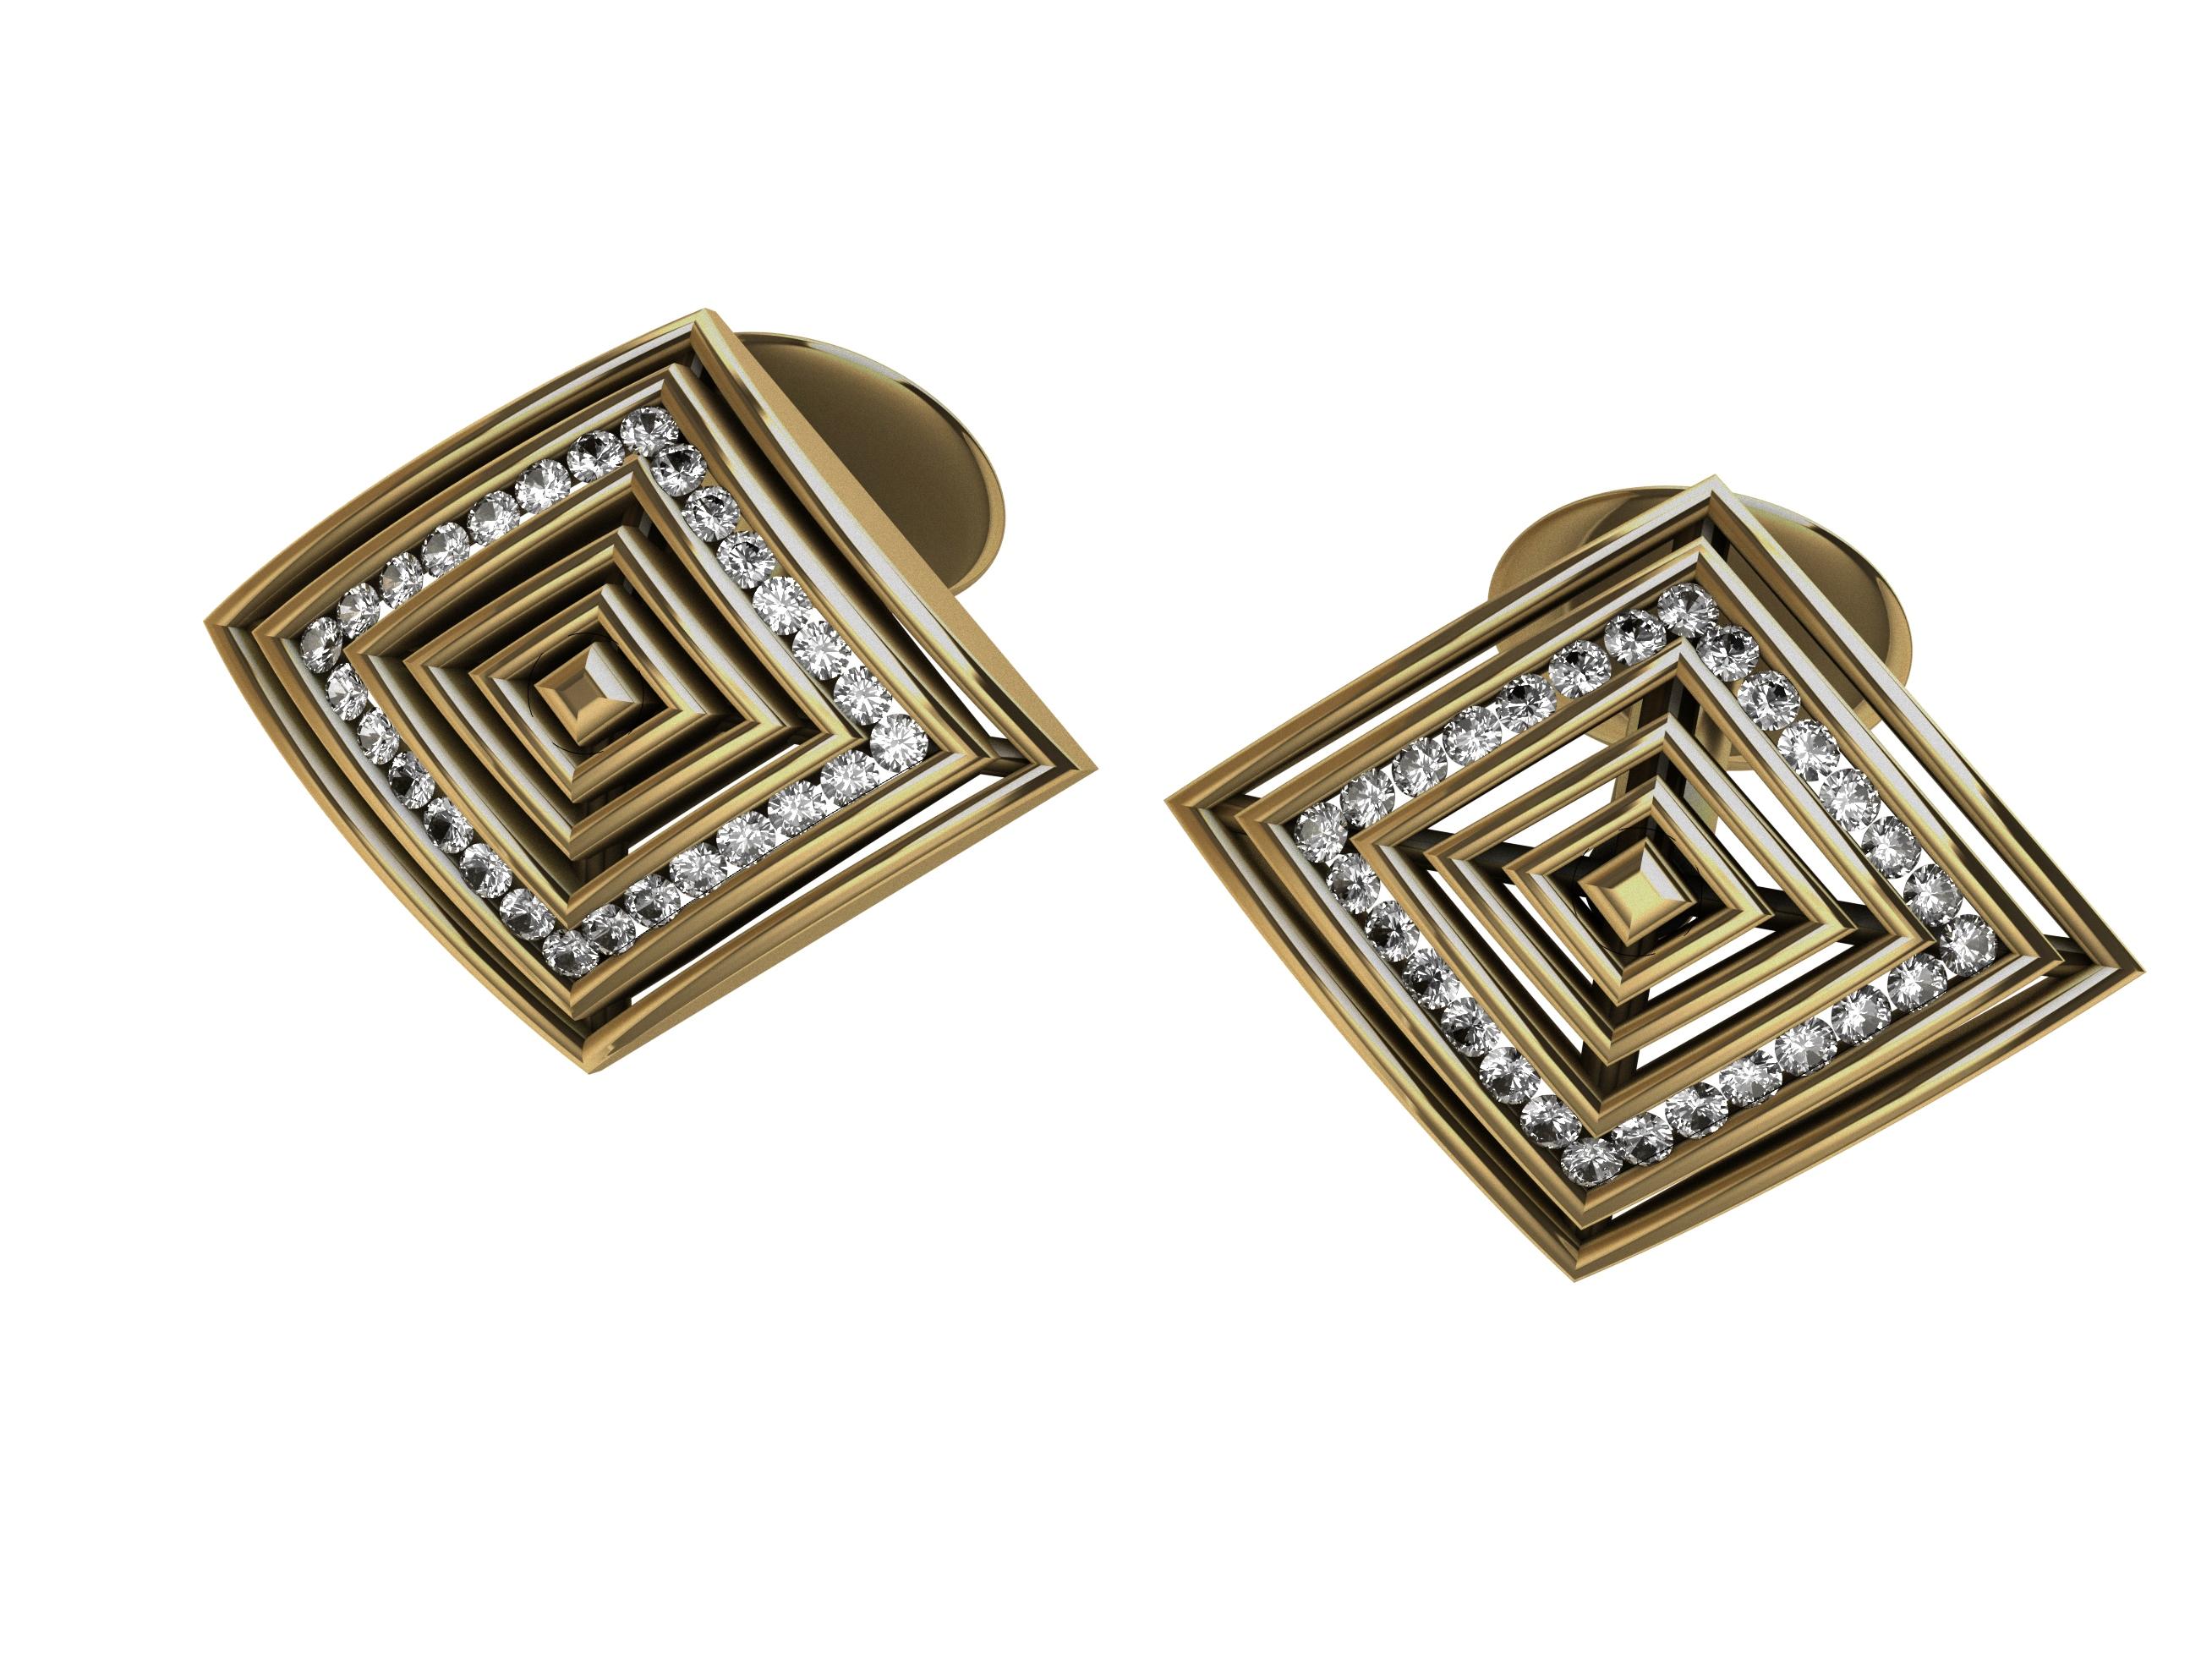 18 Karat Yellow Gold Diamonds Rhombus Cufflinks 
 From the Air Cooled Series. I designed rings from this shape. Now cuff links. Inspired by light, and air movement . Simple domed rhombus shape with repeating rows to create a playfulness with the